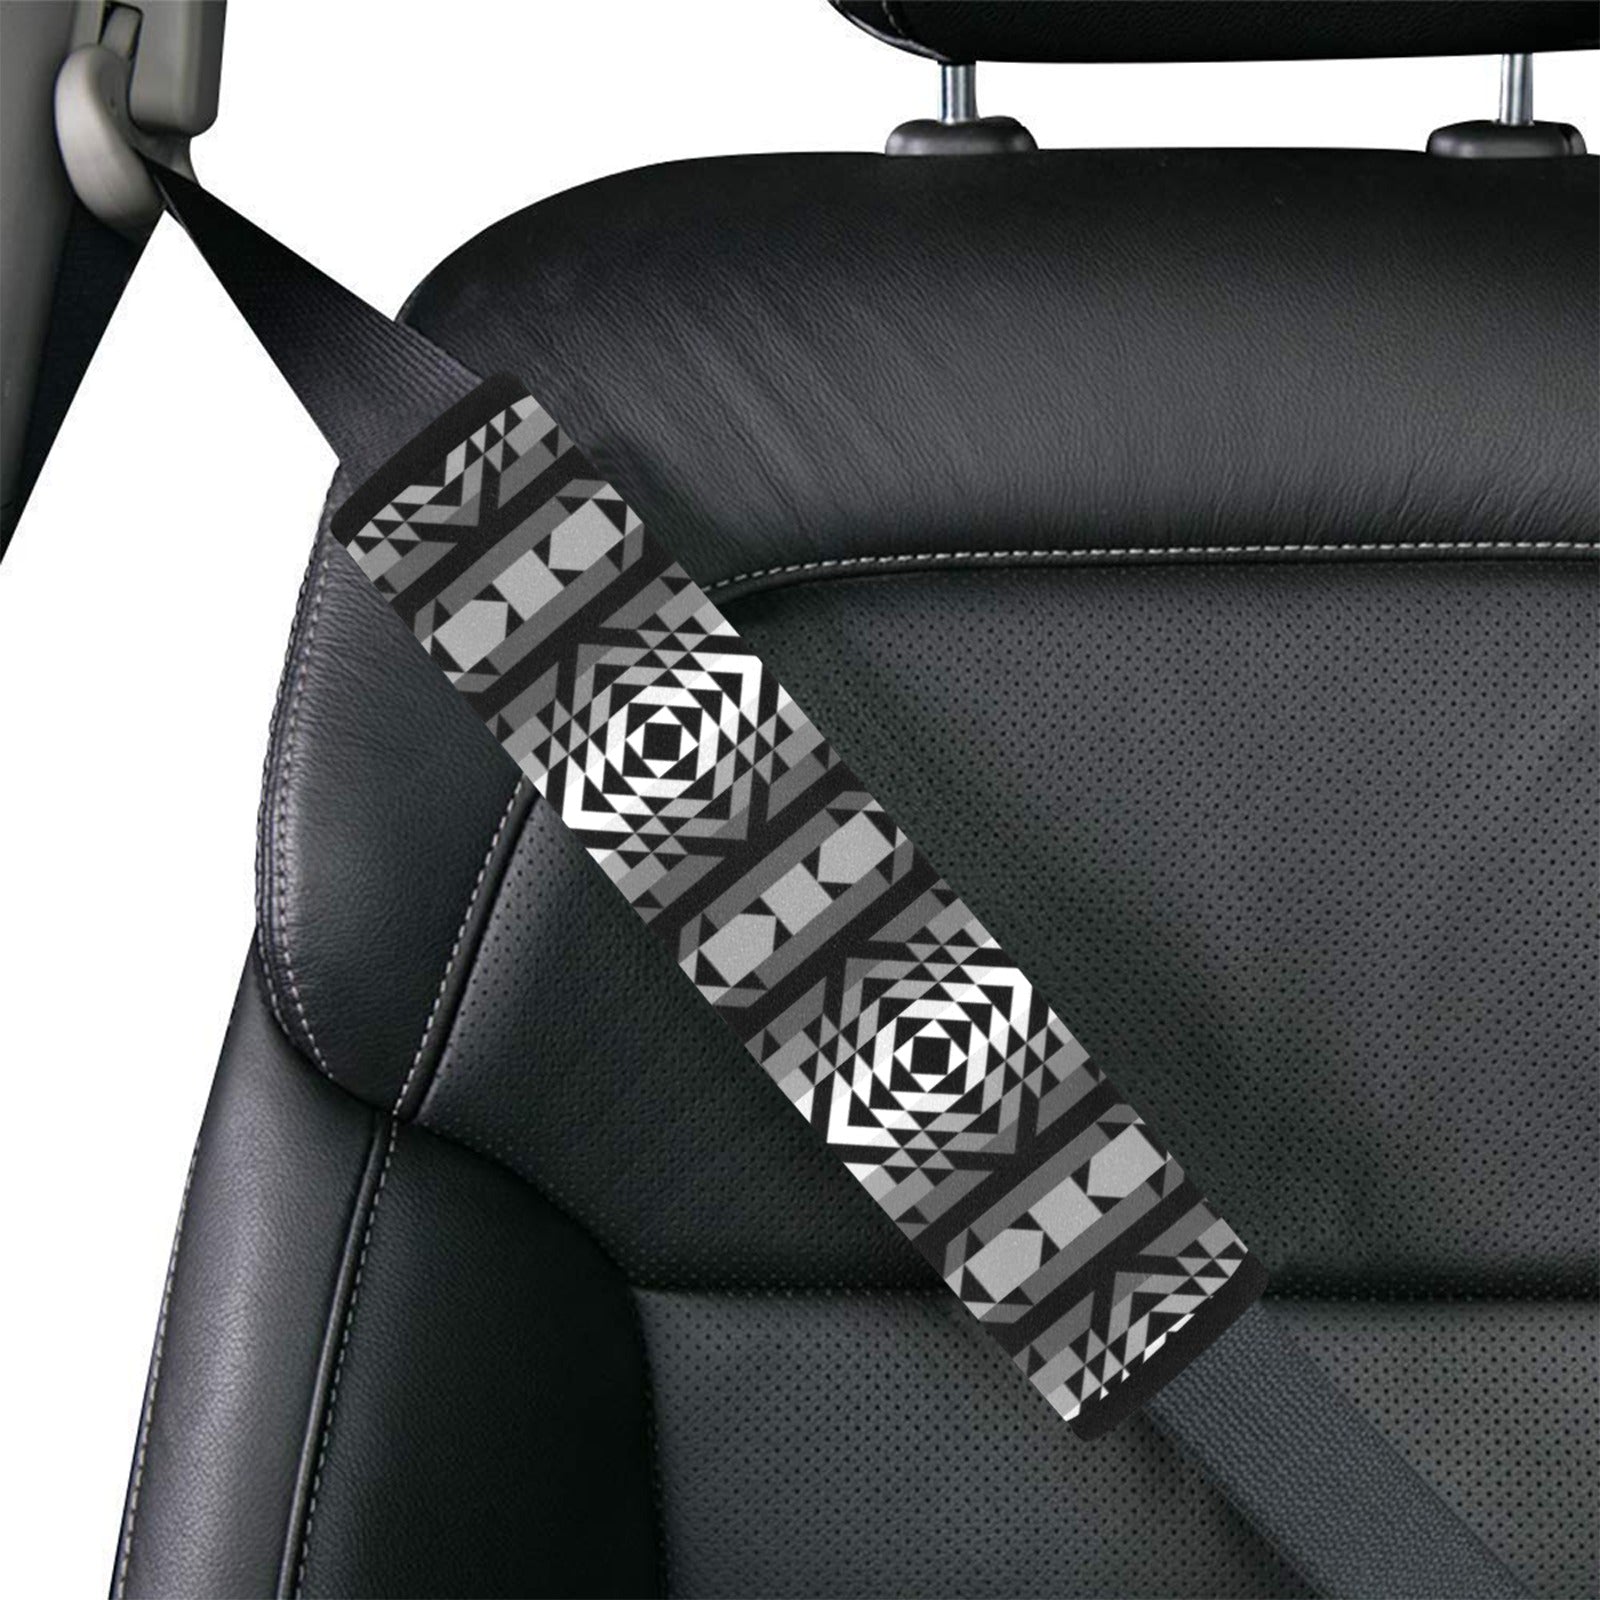 Black Rose Shadow Car Seat Belt Cover 7''x12.6'' (Pack of 2)